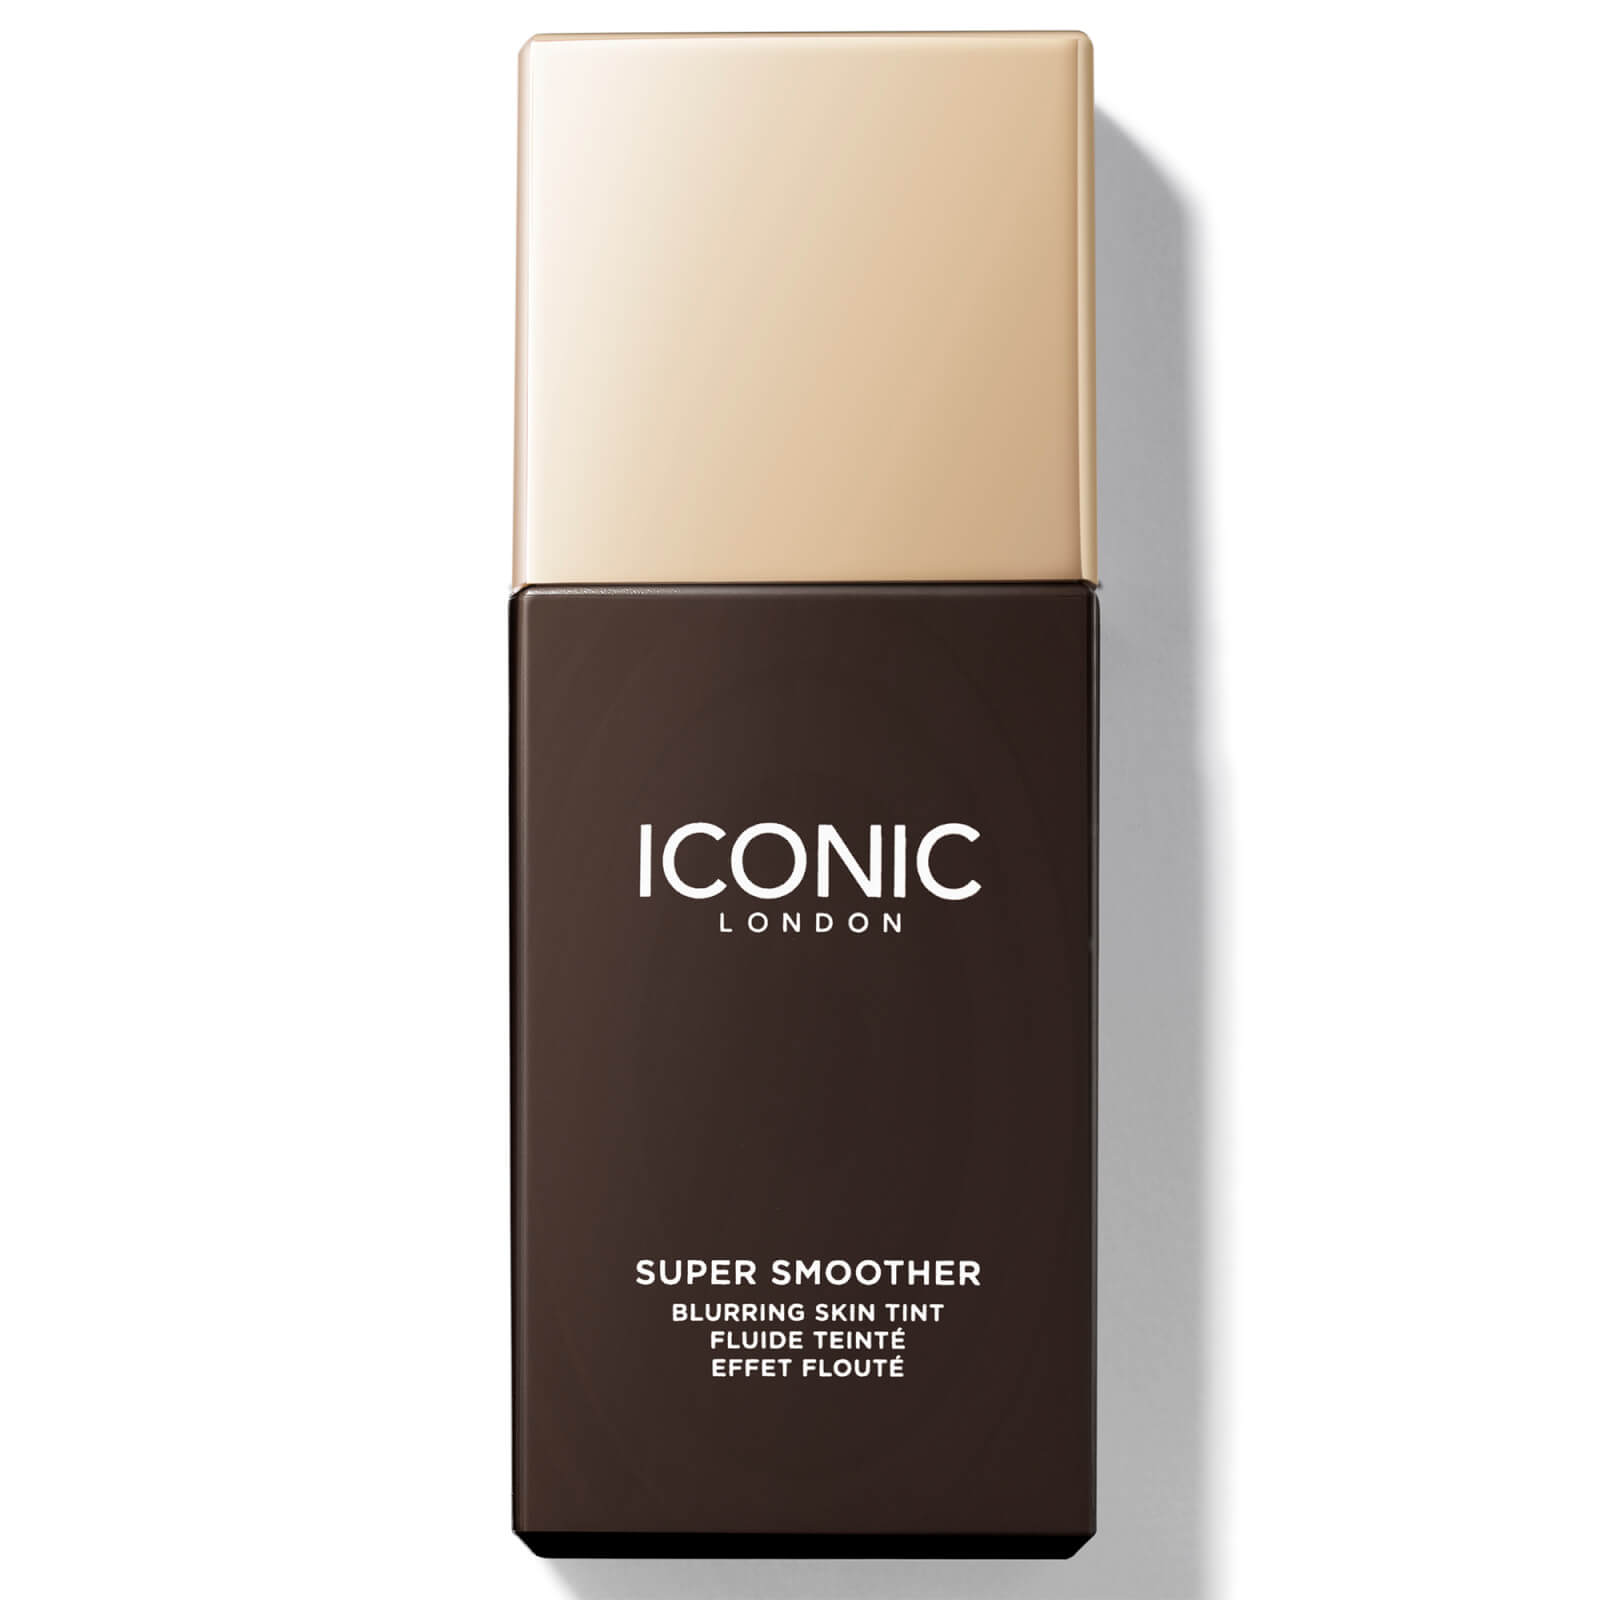 ICONIC London Super Smoother Blurring Skin Tint 30ml (Various Shades) - Neutral Rich